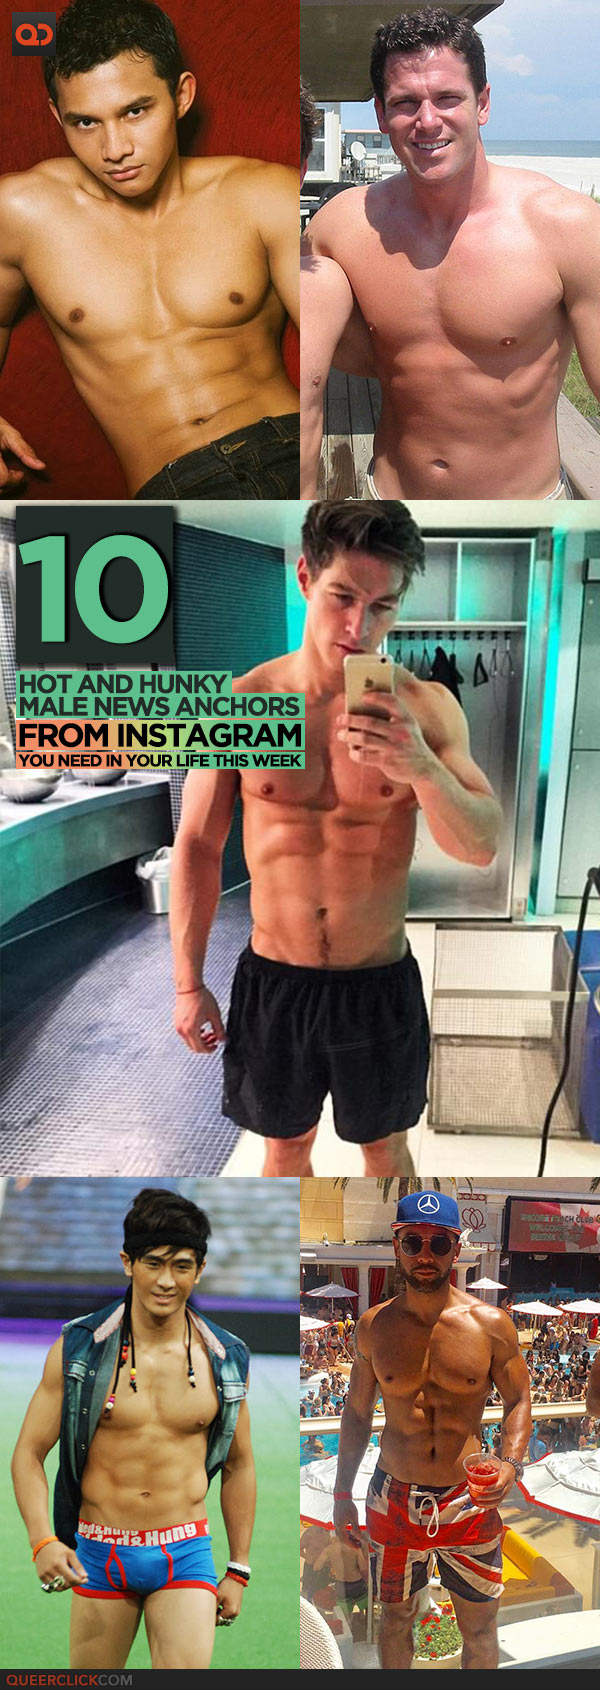 10 Hot And Hunky Male News Anchors From Instagram You Need In Your Life This Week!